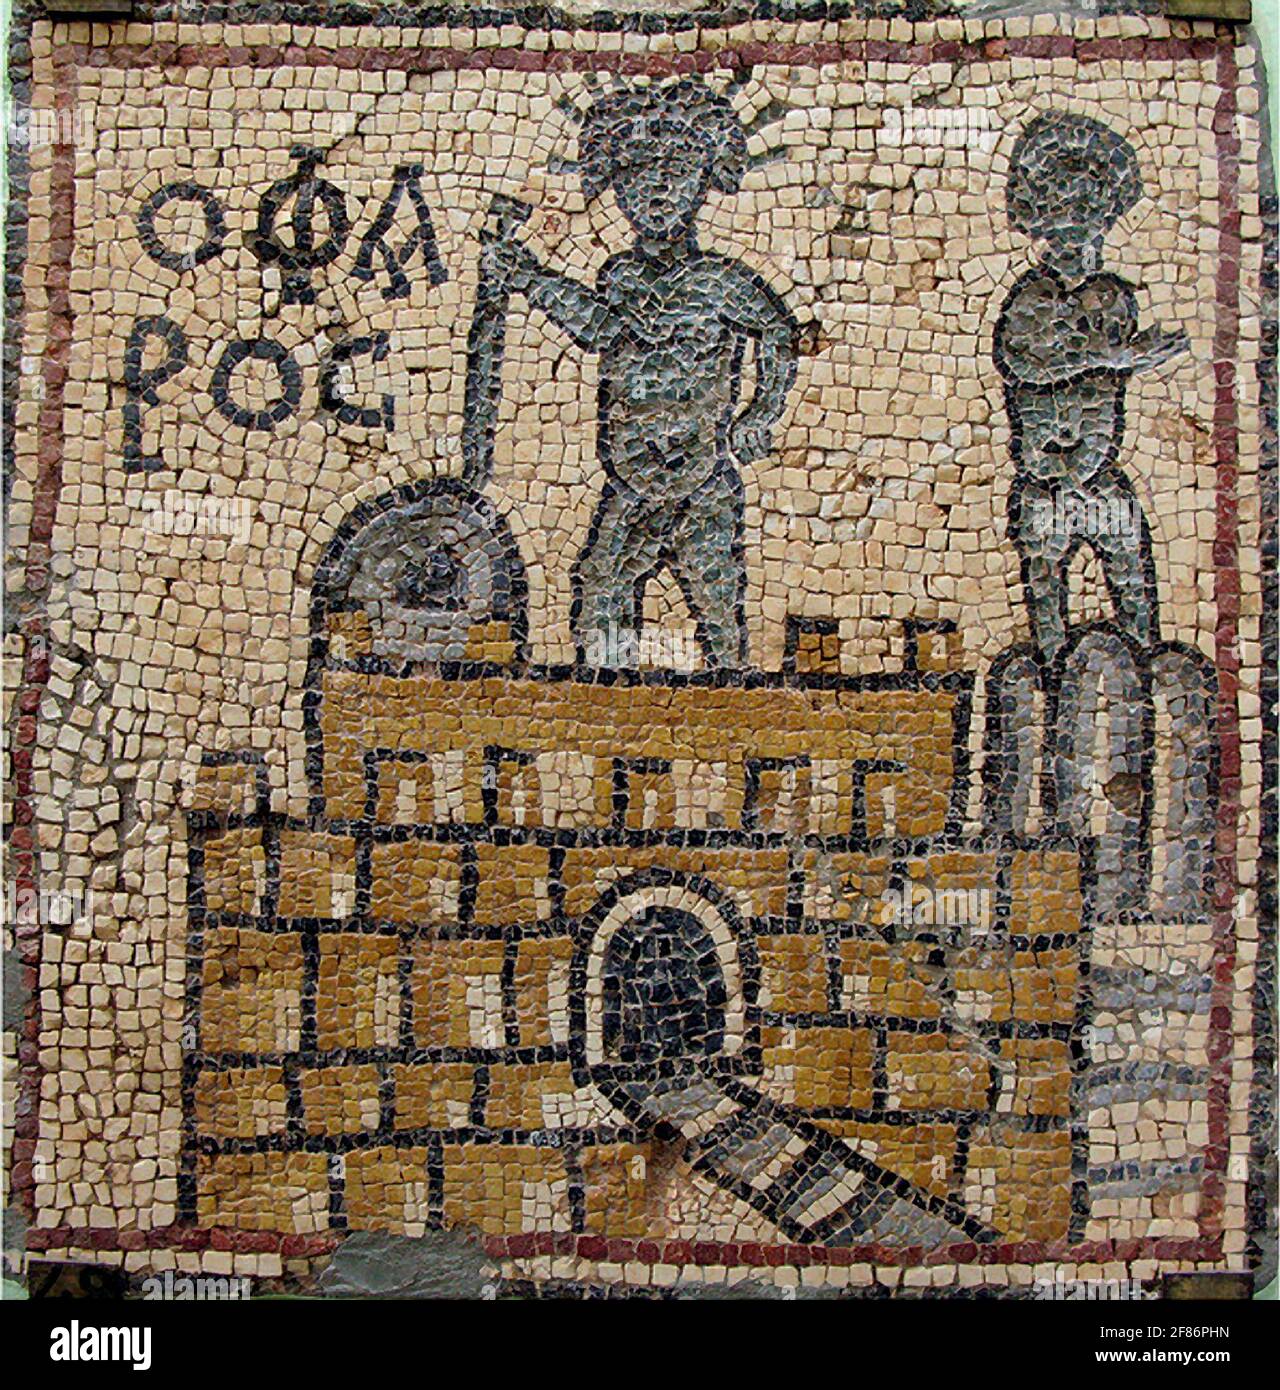 6845. Mosaic panel depicting the lighthouse of Alexandria (Egypt). found in the Qasr Libya in Libya a 4 th. C. AD. Byzantine fortress. Stock Photo